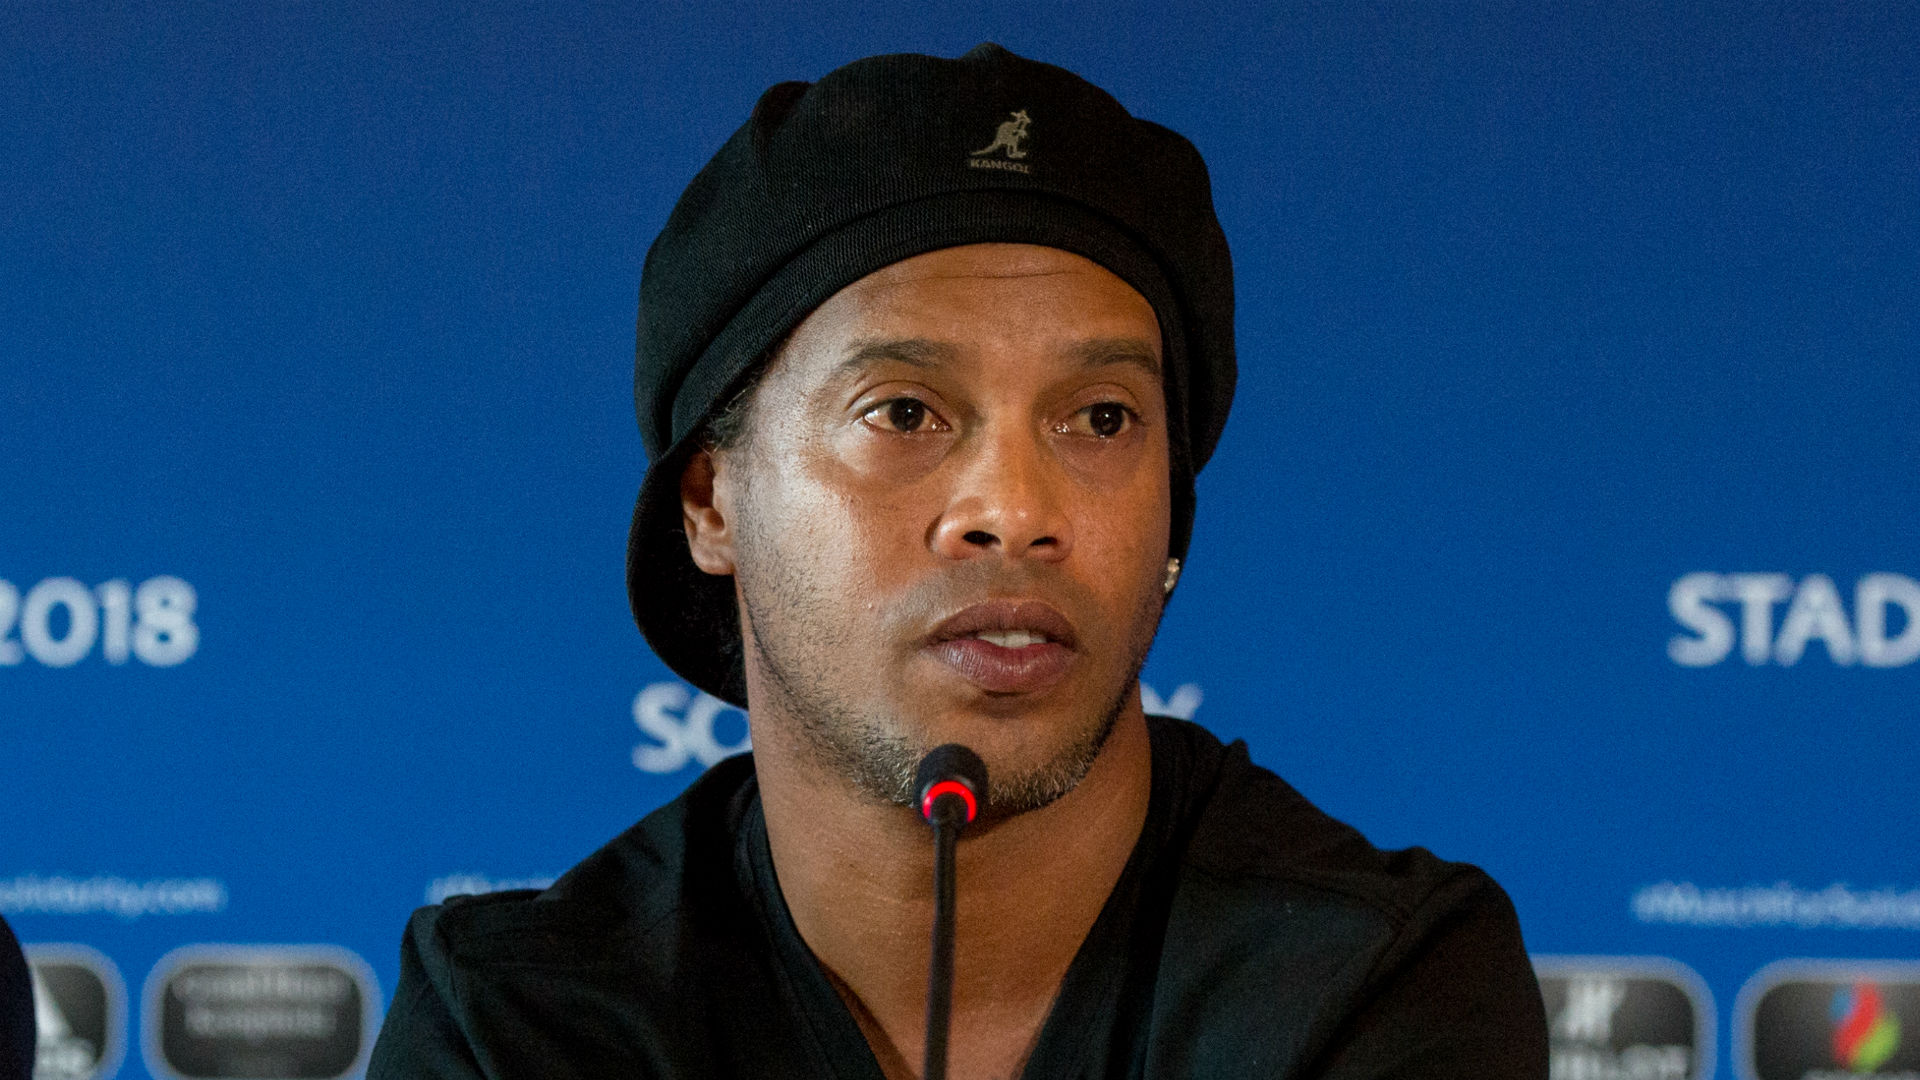 After spending more than a month in a Paraguayan jail, Ronaldinho and his brother have now been placed under house arrest at a hotel.